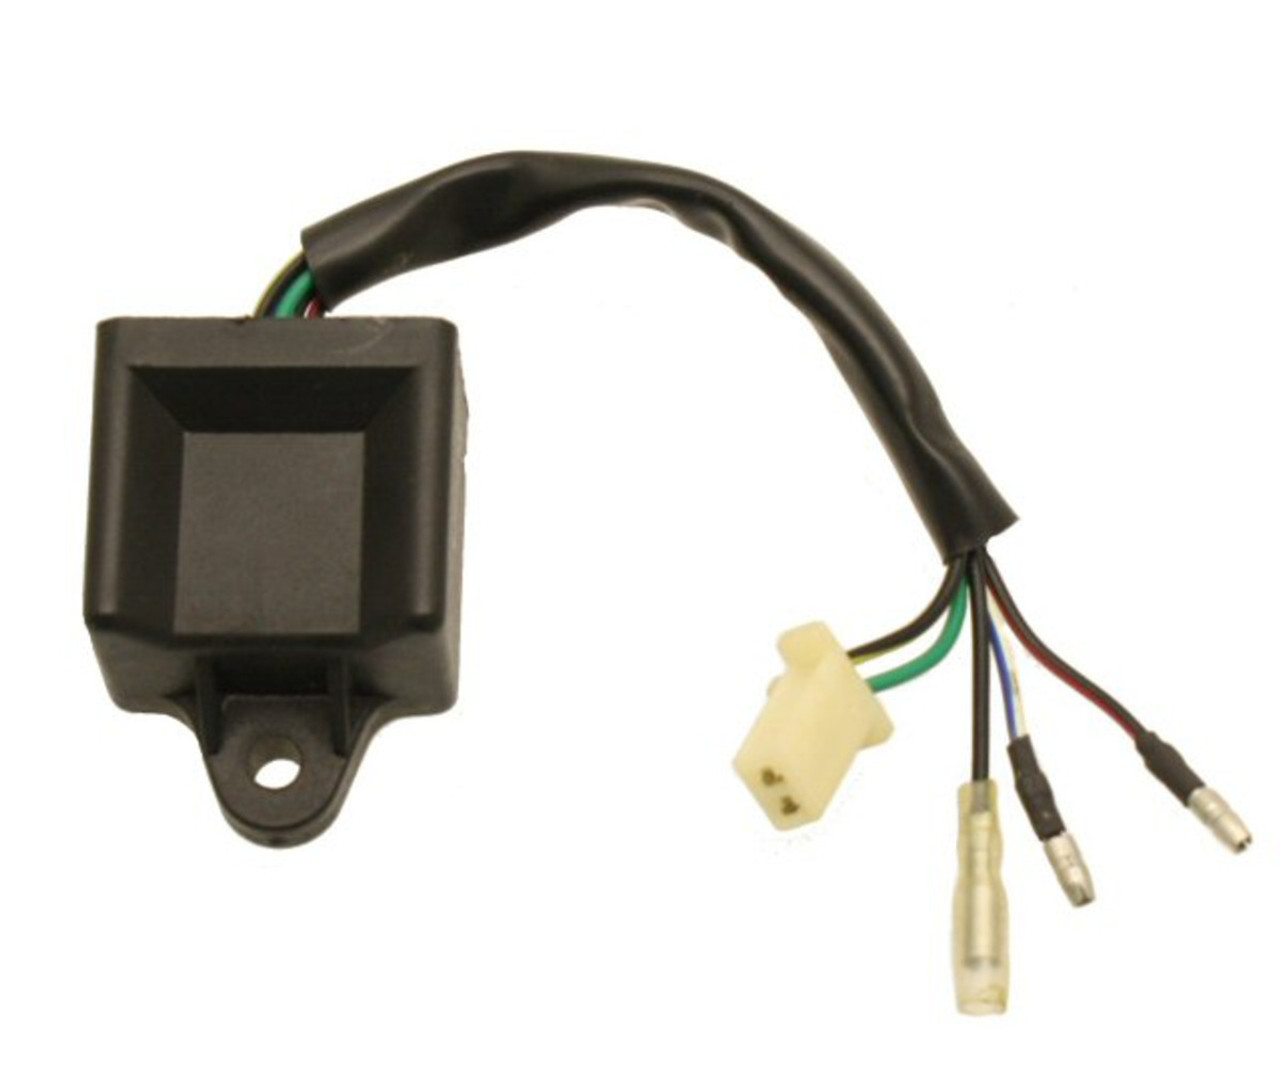 5 WIRE CDI FOR 50cc, 2-STROKE 40QMB, MINARELLI BASED ENGINES & SCOOTERS